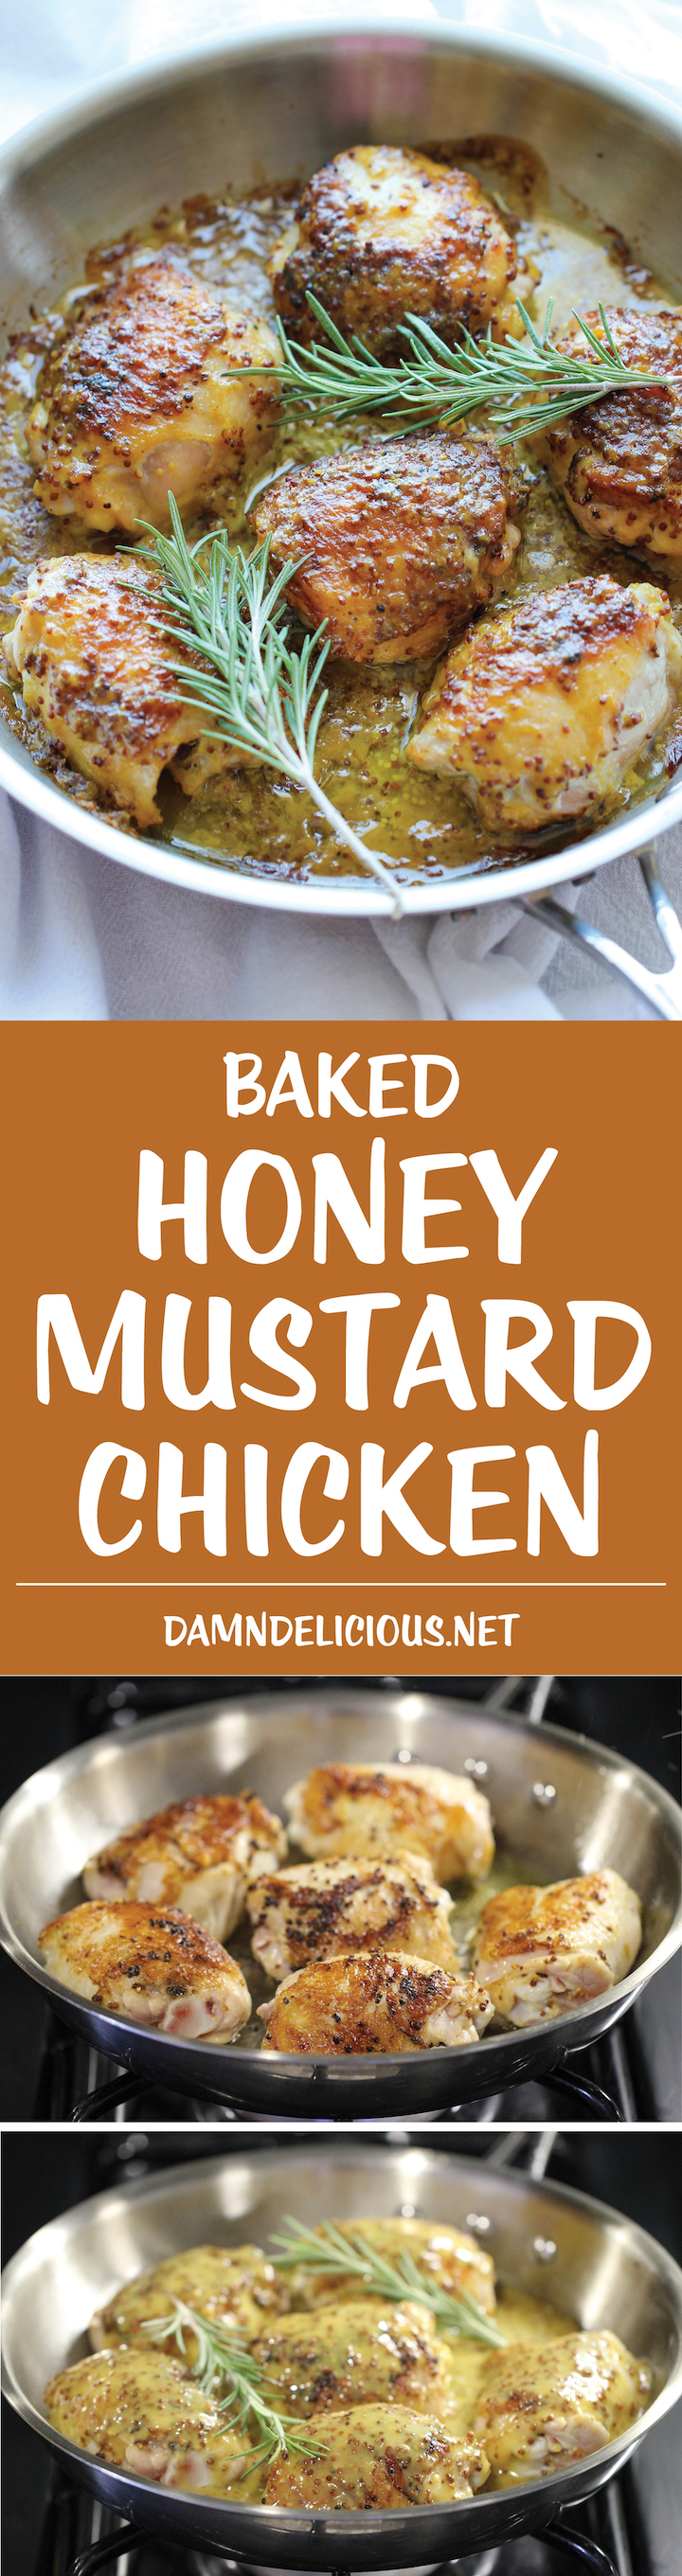 Baked Honey Mustard Chicken - The creamiest honey mustard chicken ever! It's so good, you'll want to eat the honey mustard itself with a spoon!